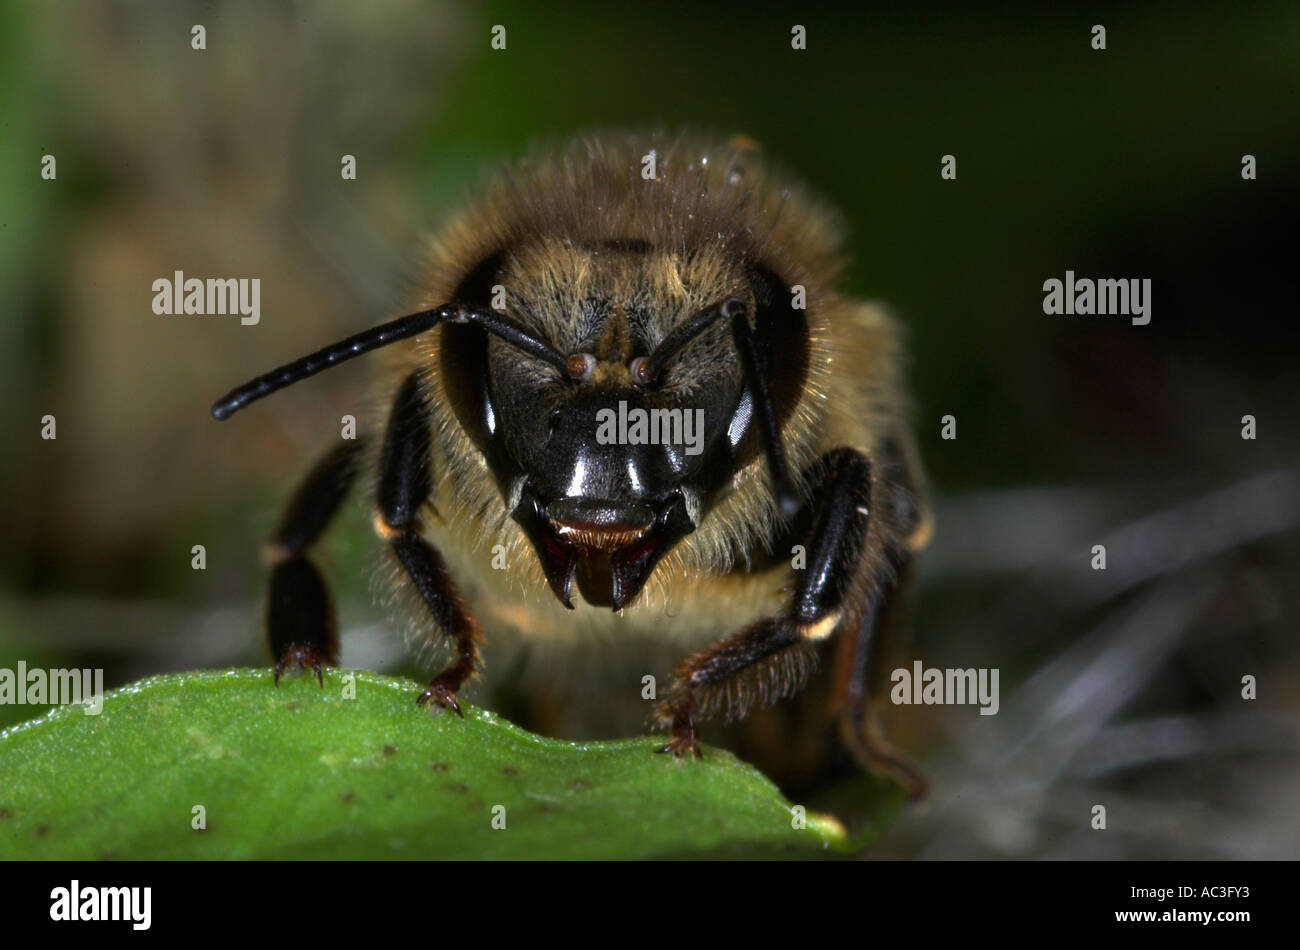 Honey Bee Apis mellifera close up of worker bees face showing eyes antennae and mouthparts United Kingdom Stock Photo